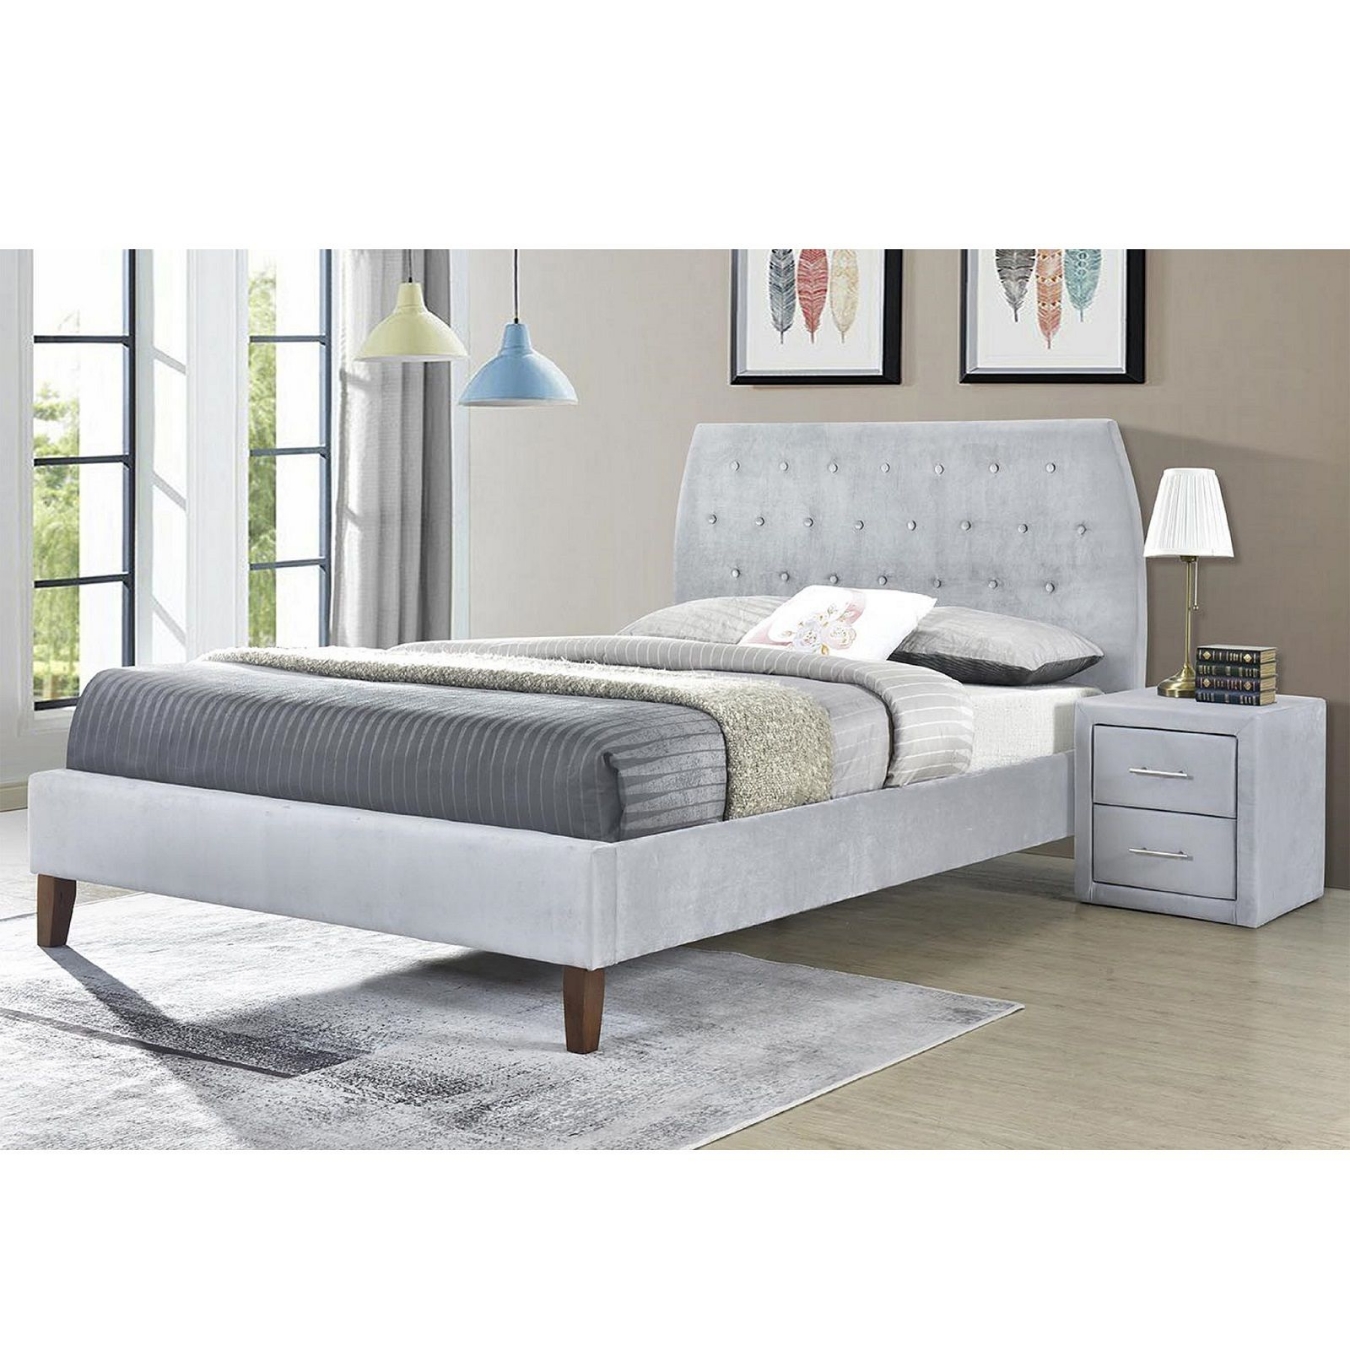 If you are looking for a bed which will be the focal point of your bedroom, this Angela Fabric Bedframe will be the best option. 